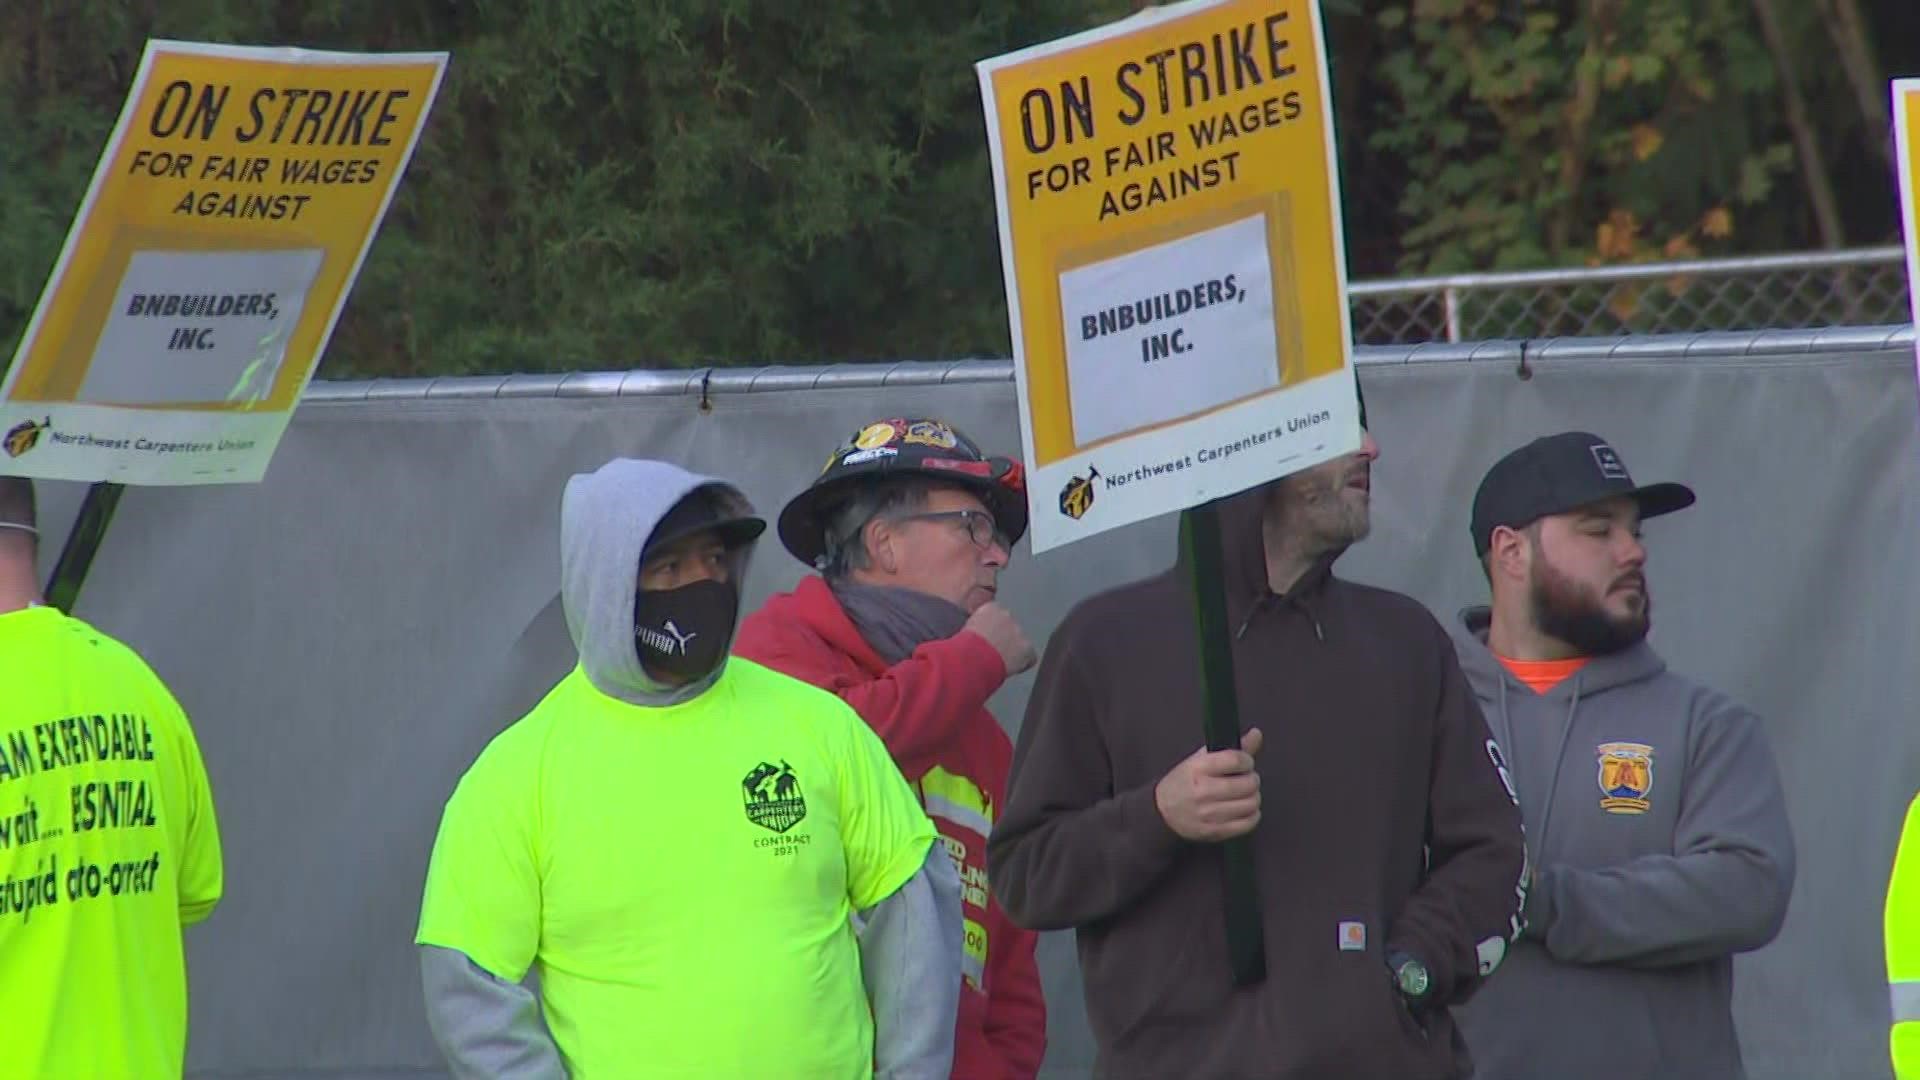 The NW Carpenter's Union rejected a fourth offer to increase wages and now construction workers are on strike.